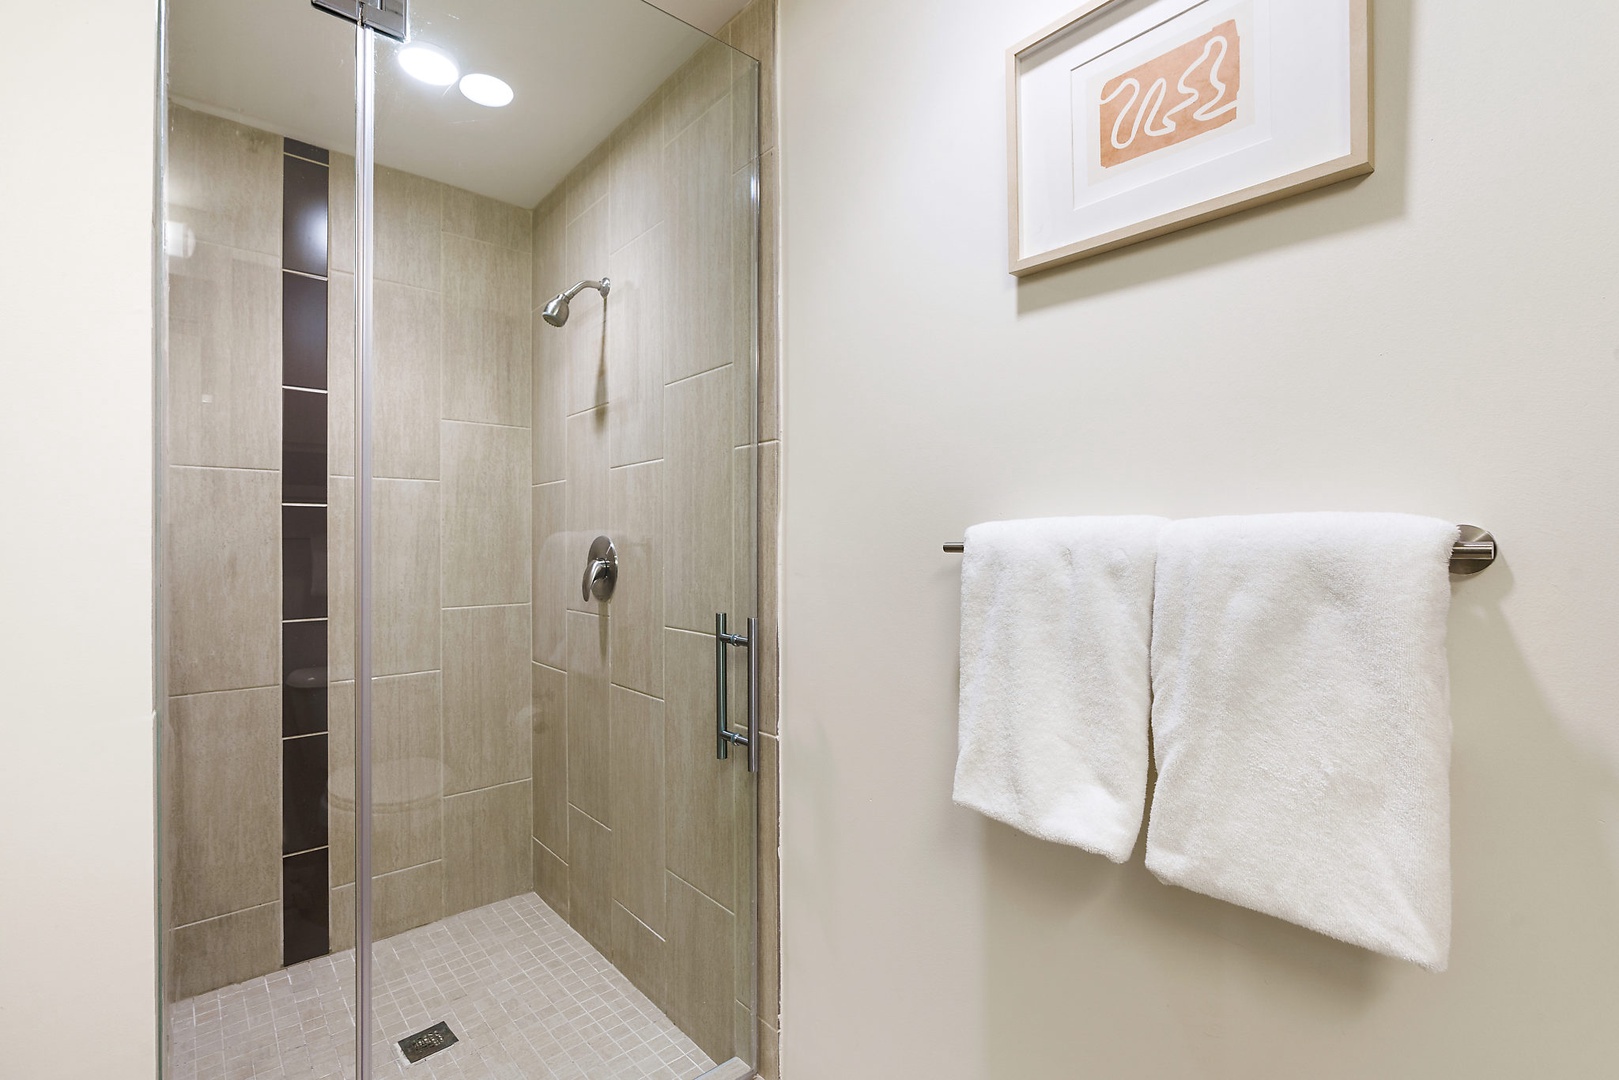 Begin anew in the contemporary walk-in shower with updated fixtures.